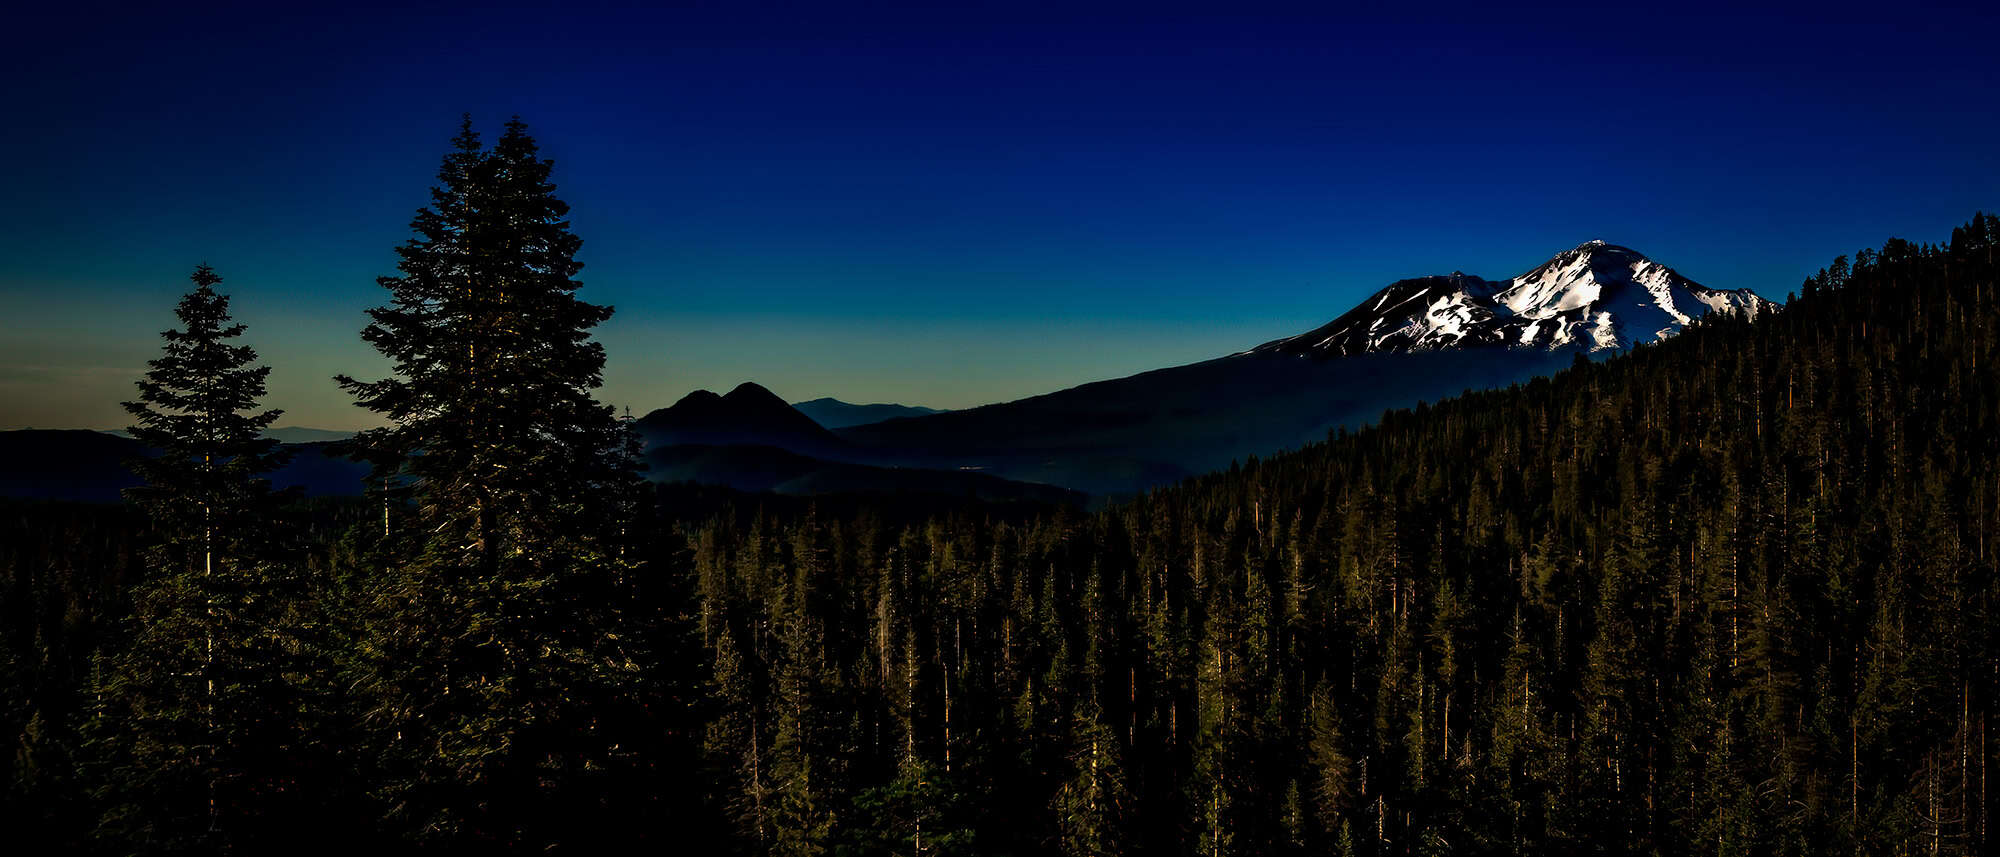 An evening view of Mount Shasta and Black Butte as seen from Castle Lake